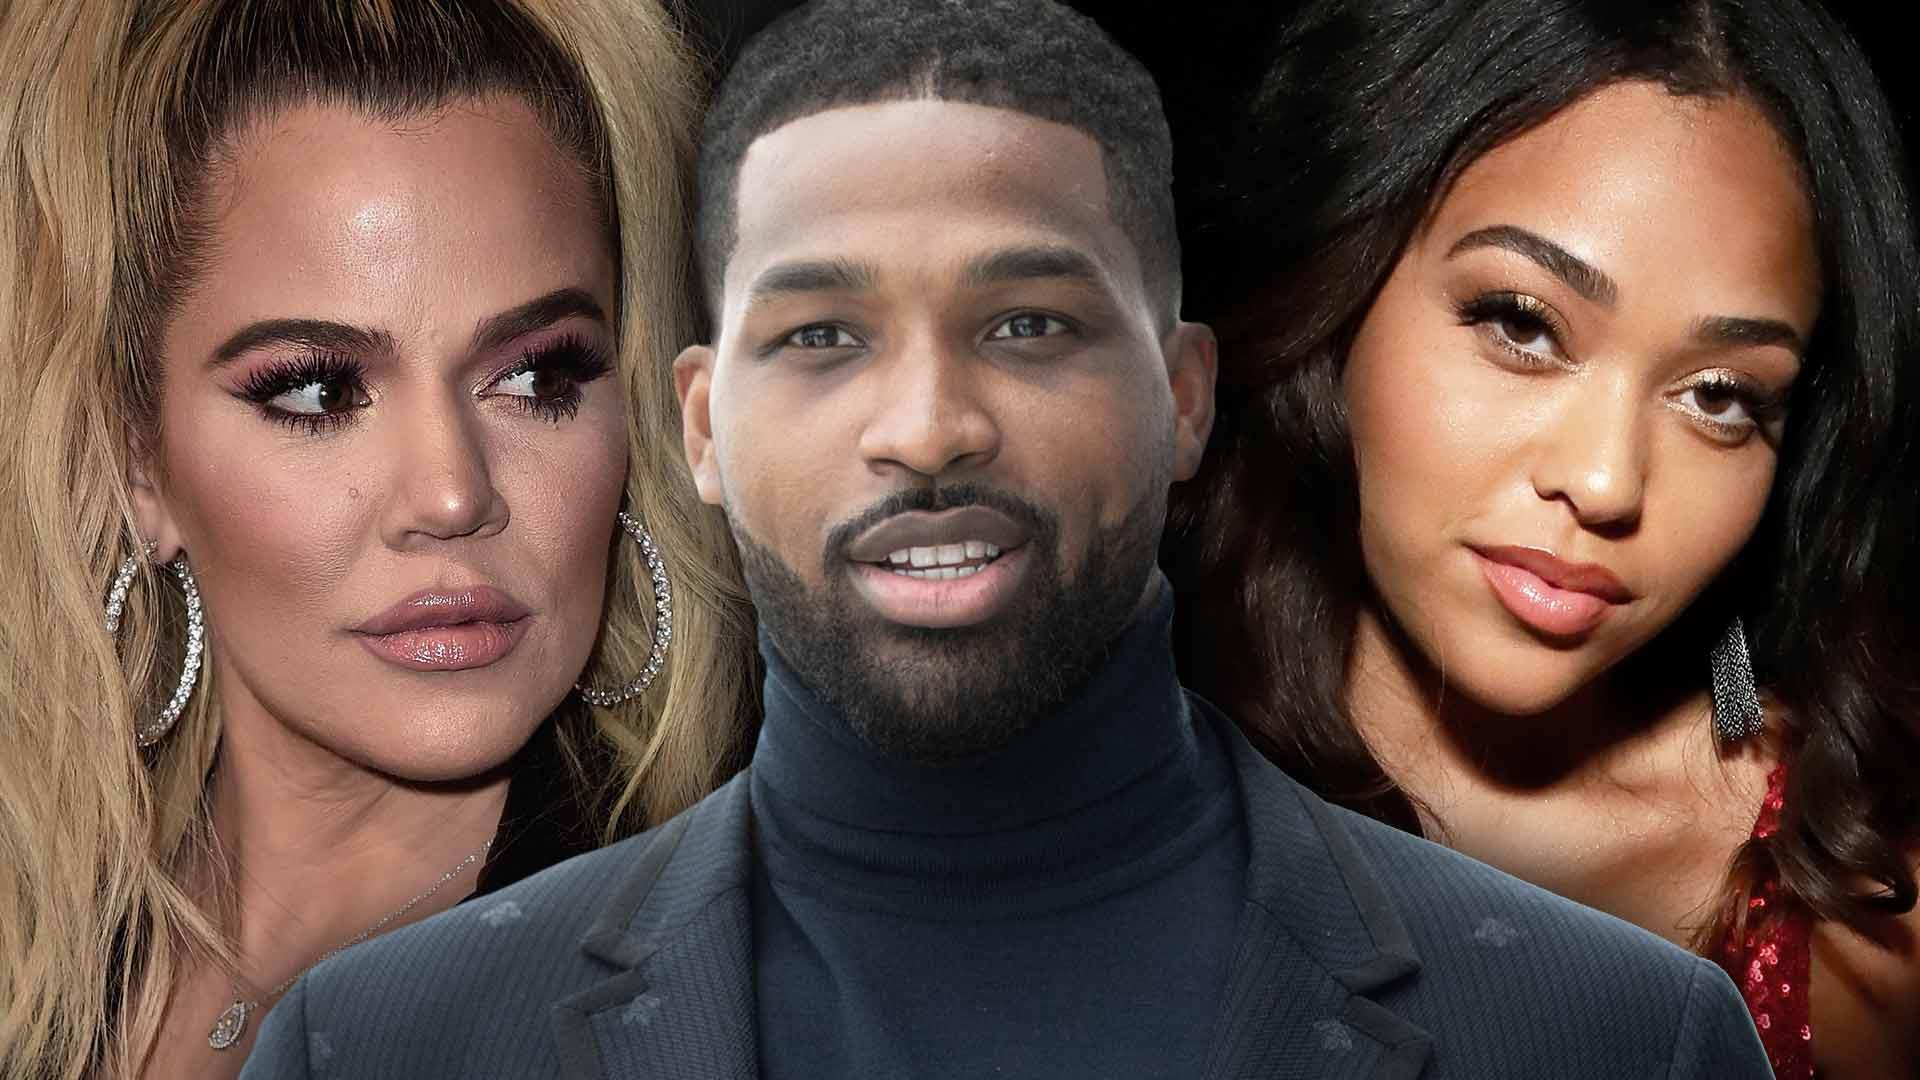 Jordyn Woods Took No Responsibility for Hook Up With Tristan Thompson, Told Khloé: He ‘Kissed Me’